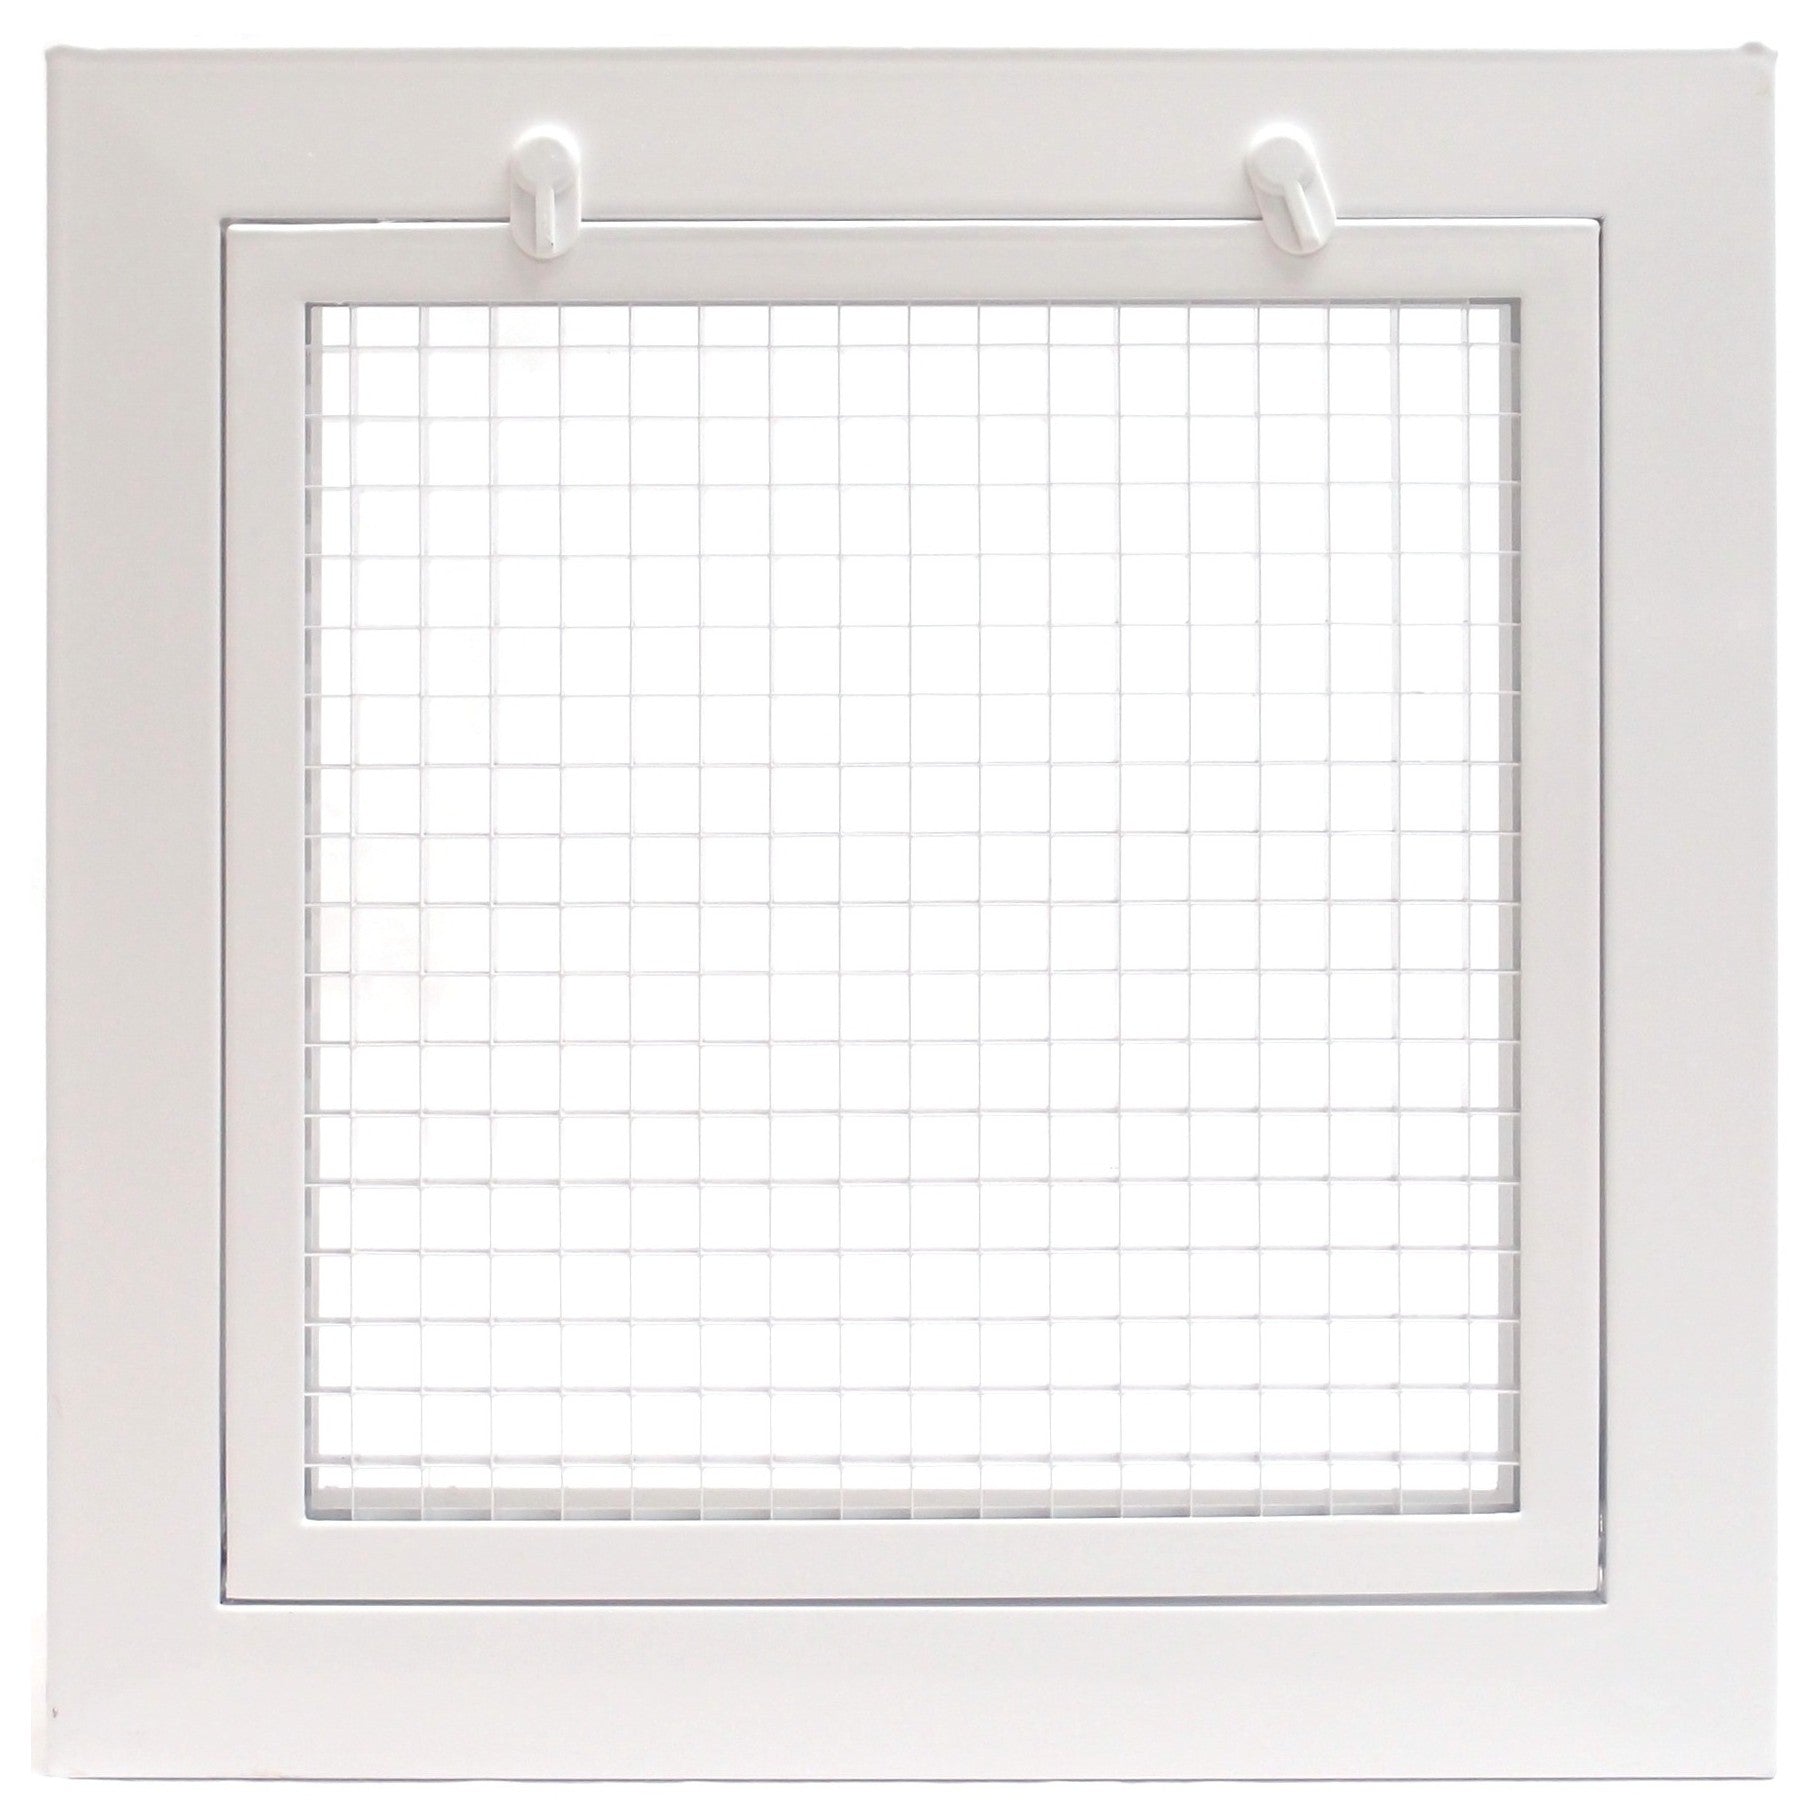 12" x 12" Cube Core Eggcrate Return Air Filter Grille for 1" Filter